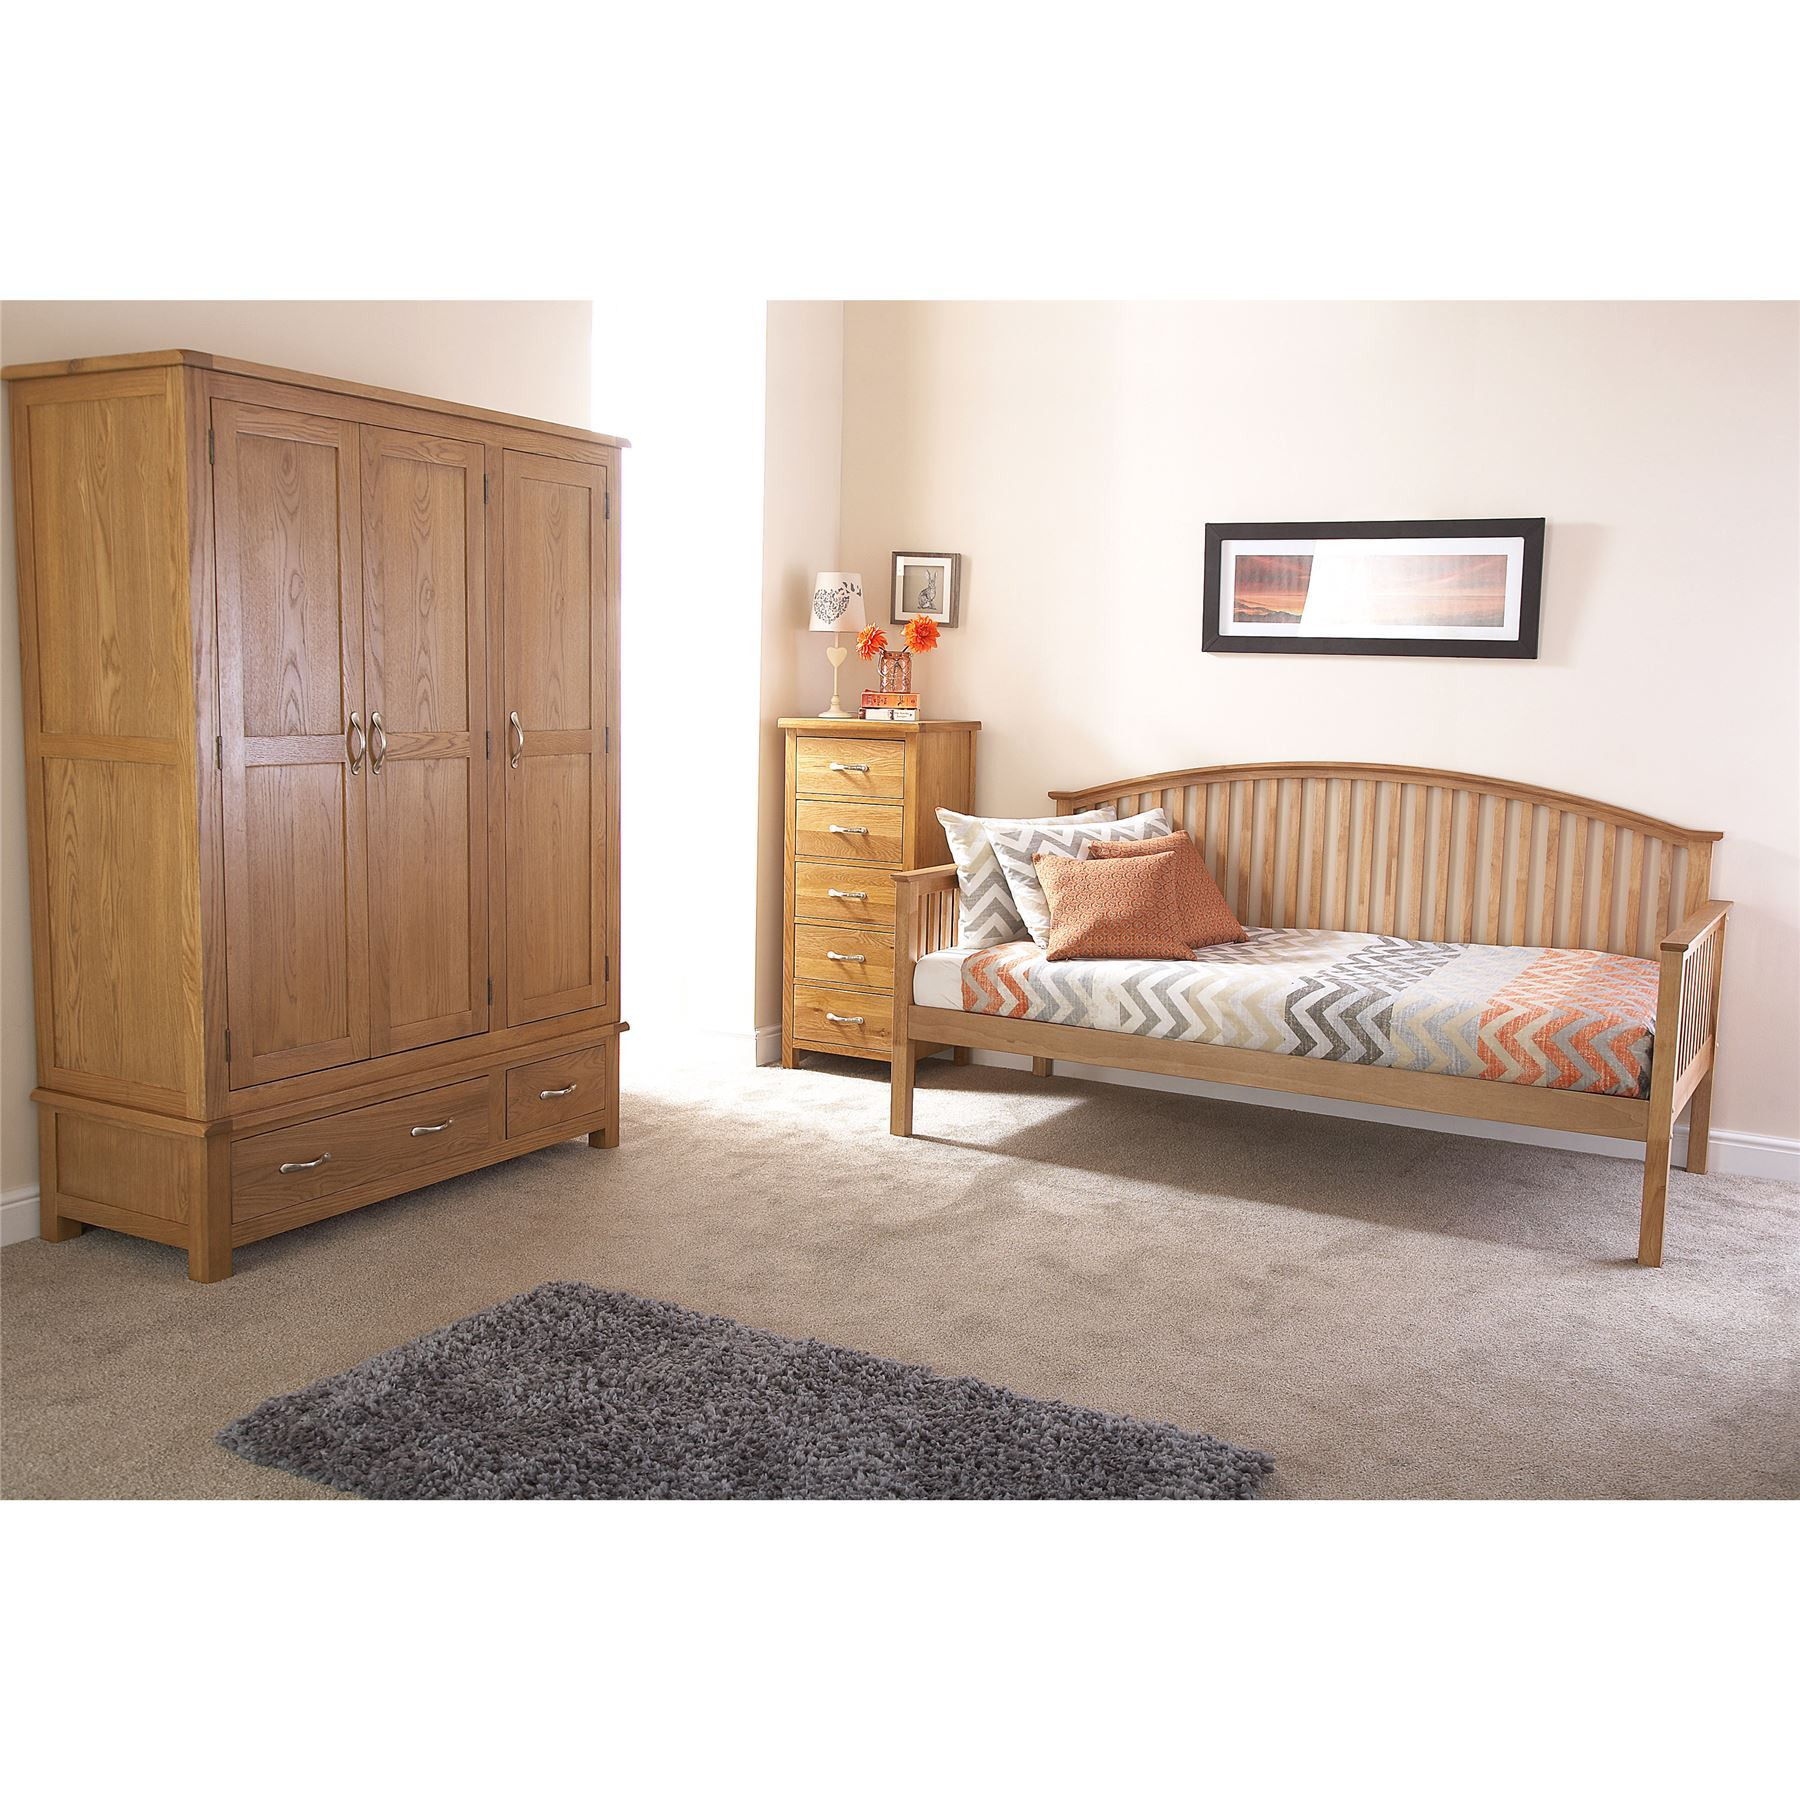 GFW Madrid Wooden Day Bed Oak - image 1